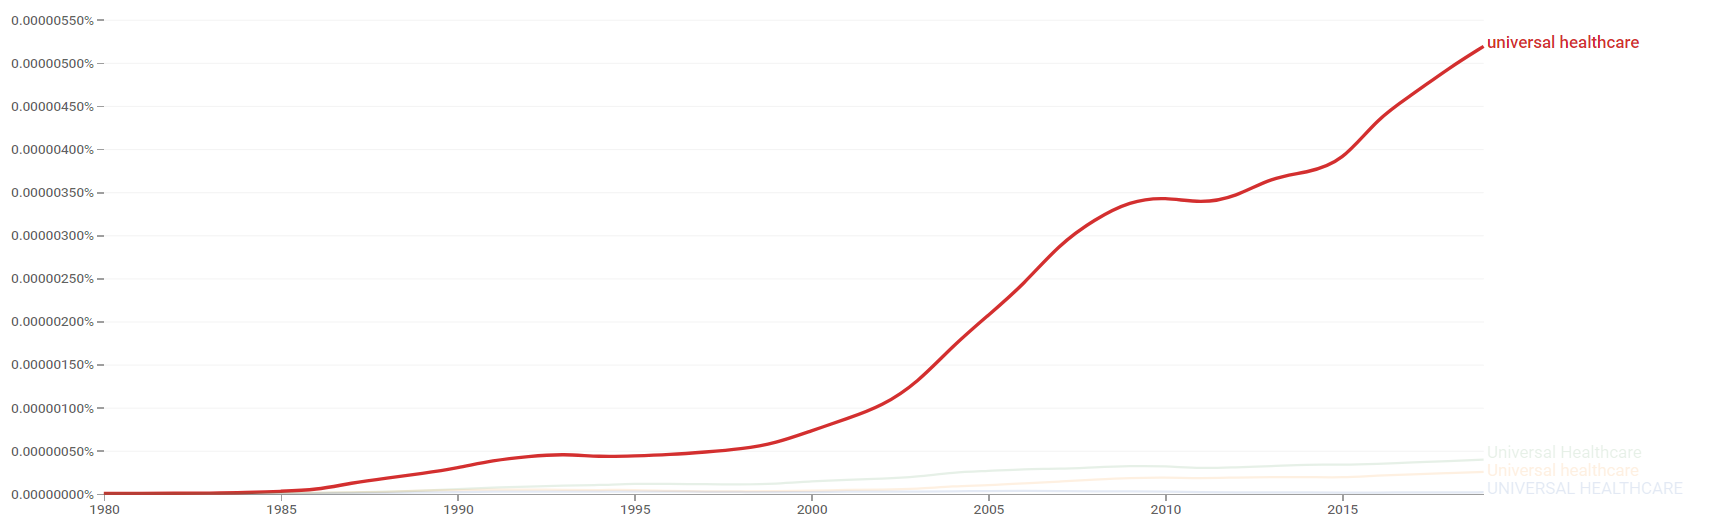 Universal healthcare ngram.png